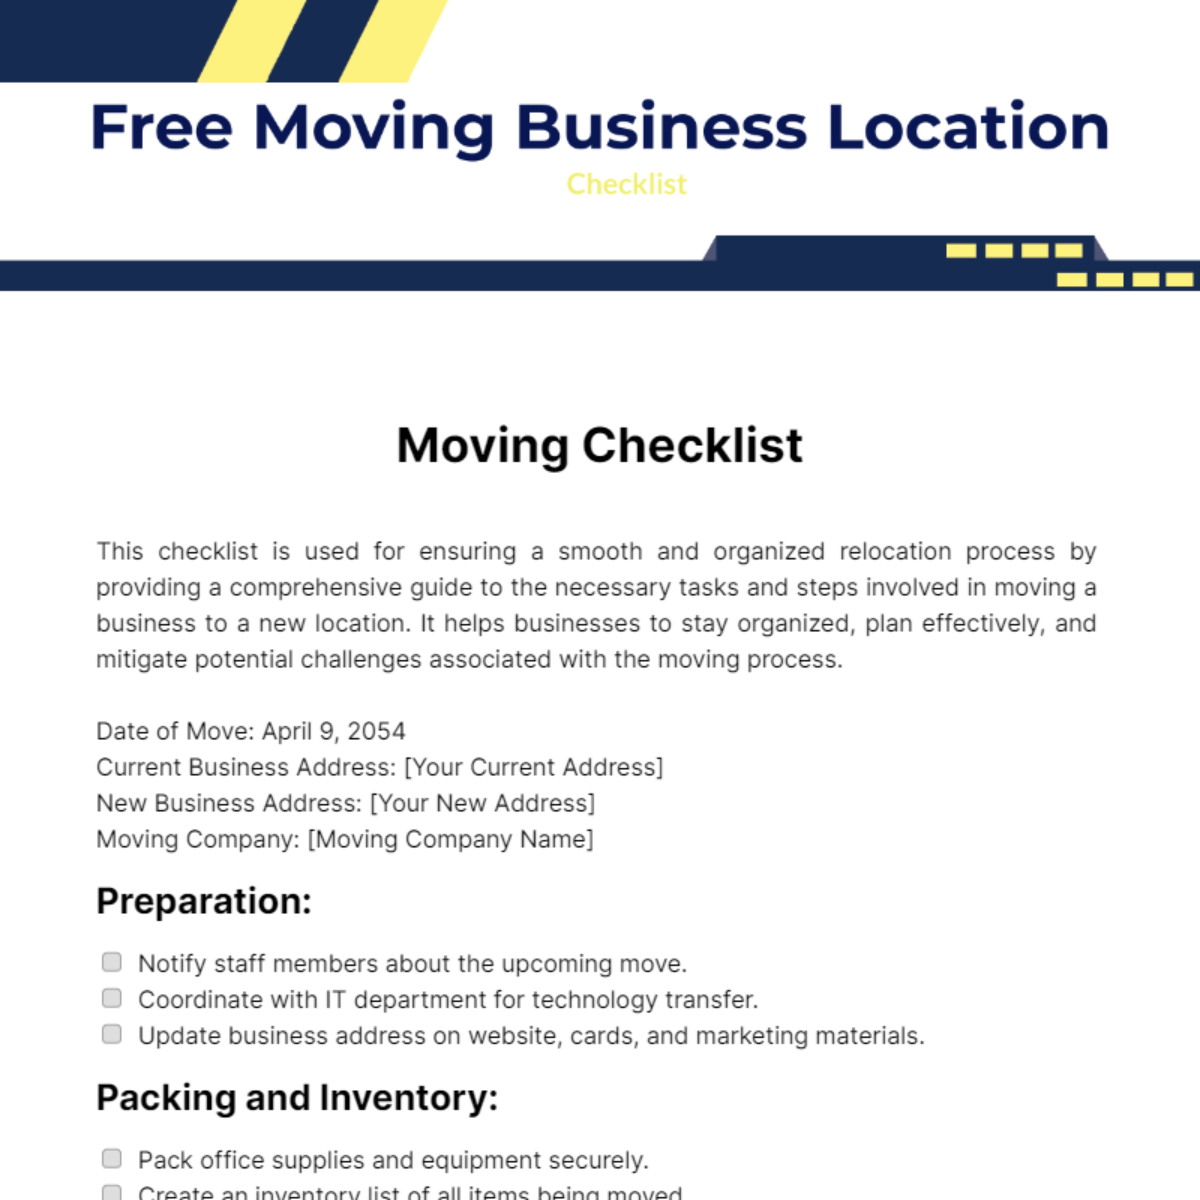 Free Moving Business Location Checklist Template